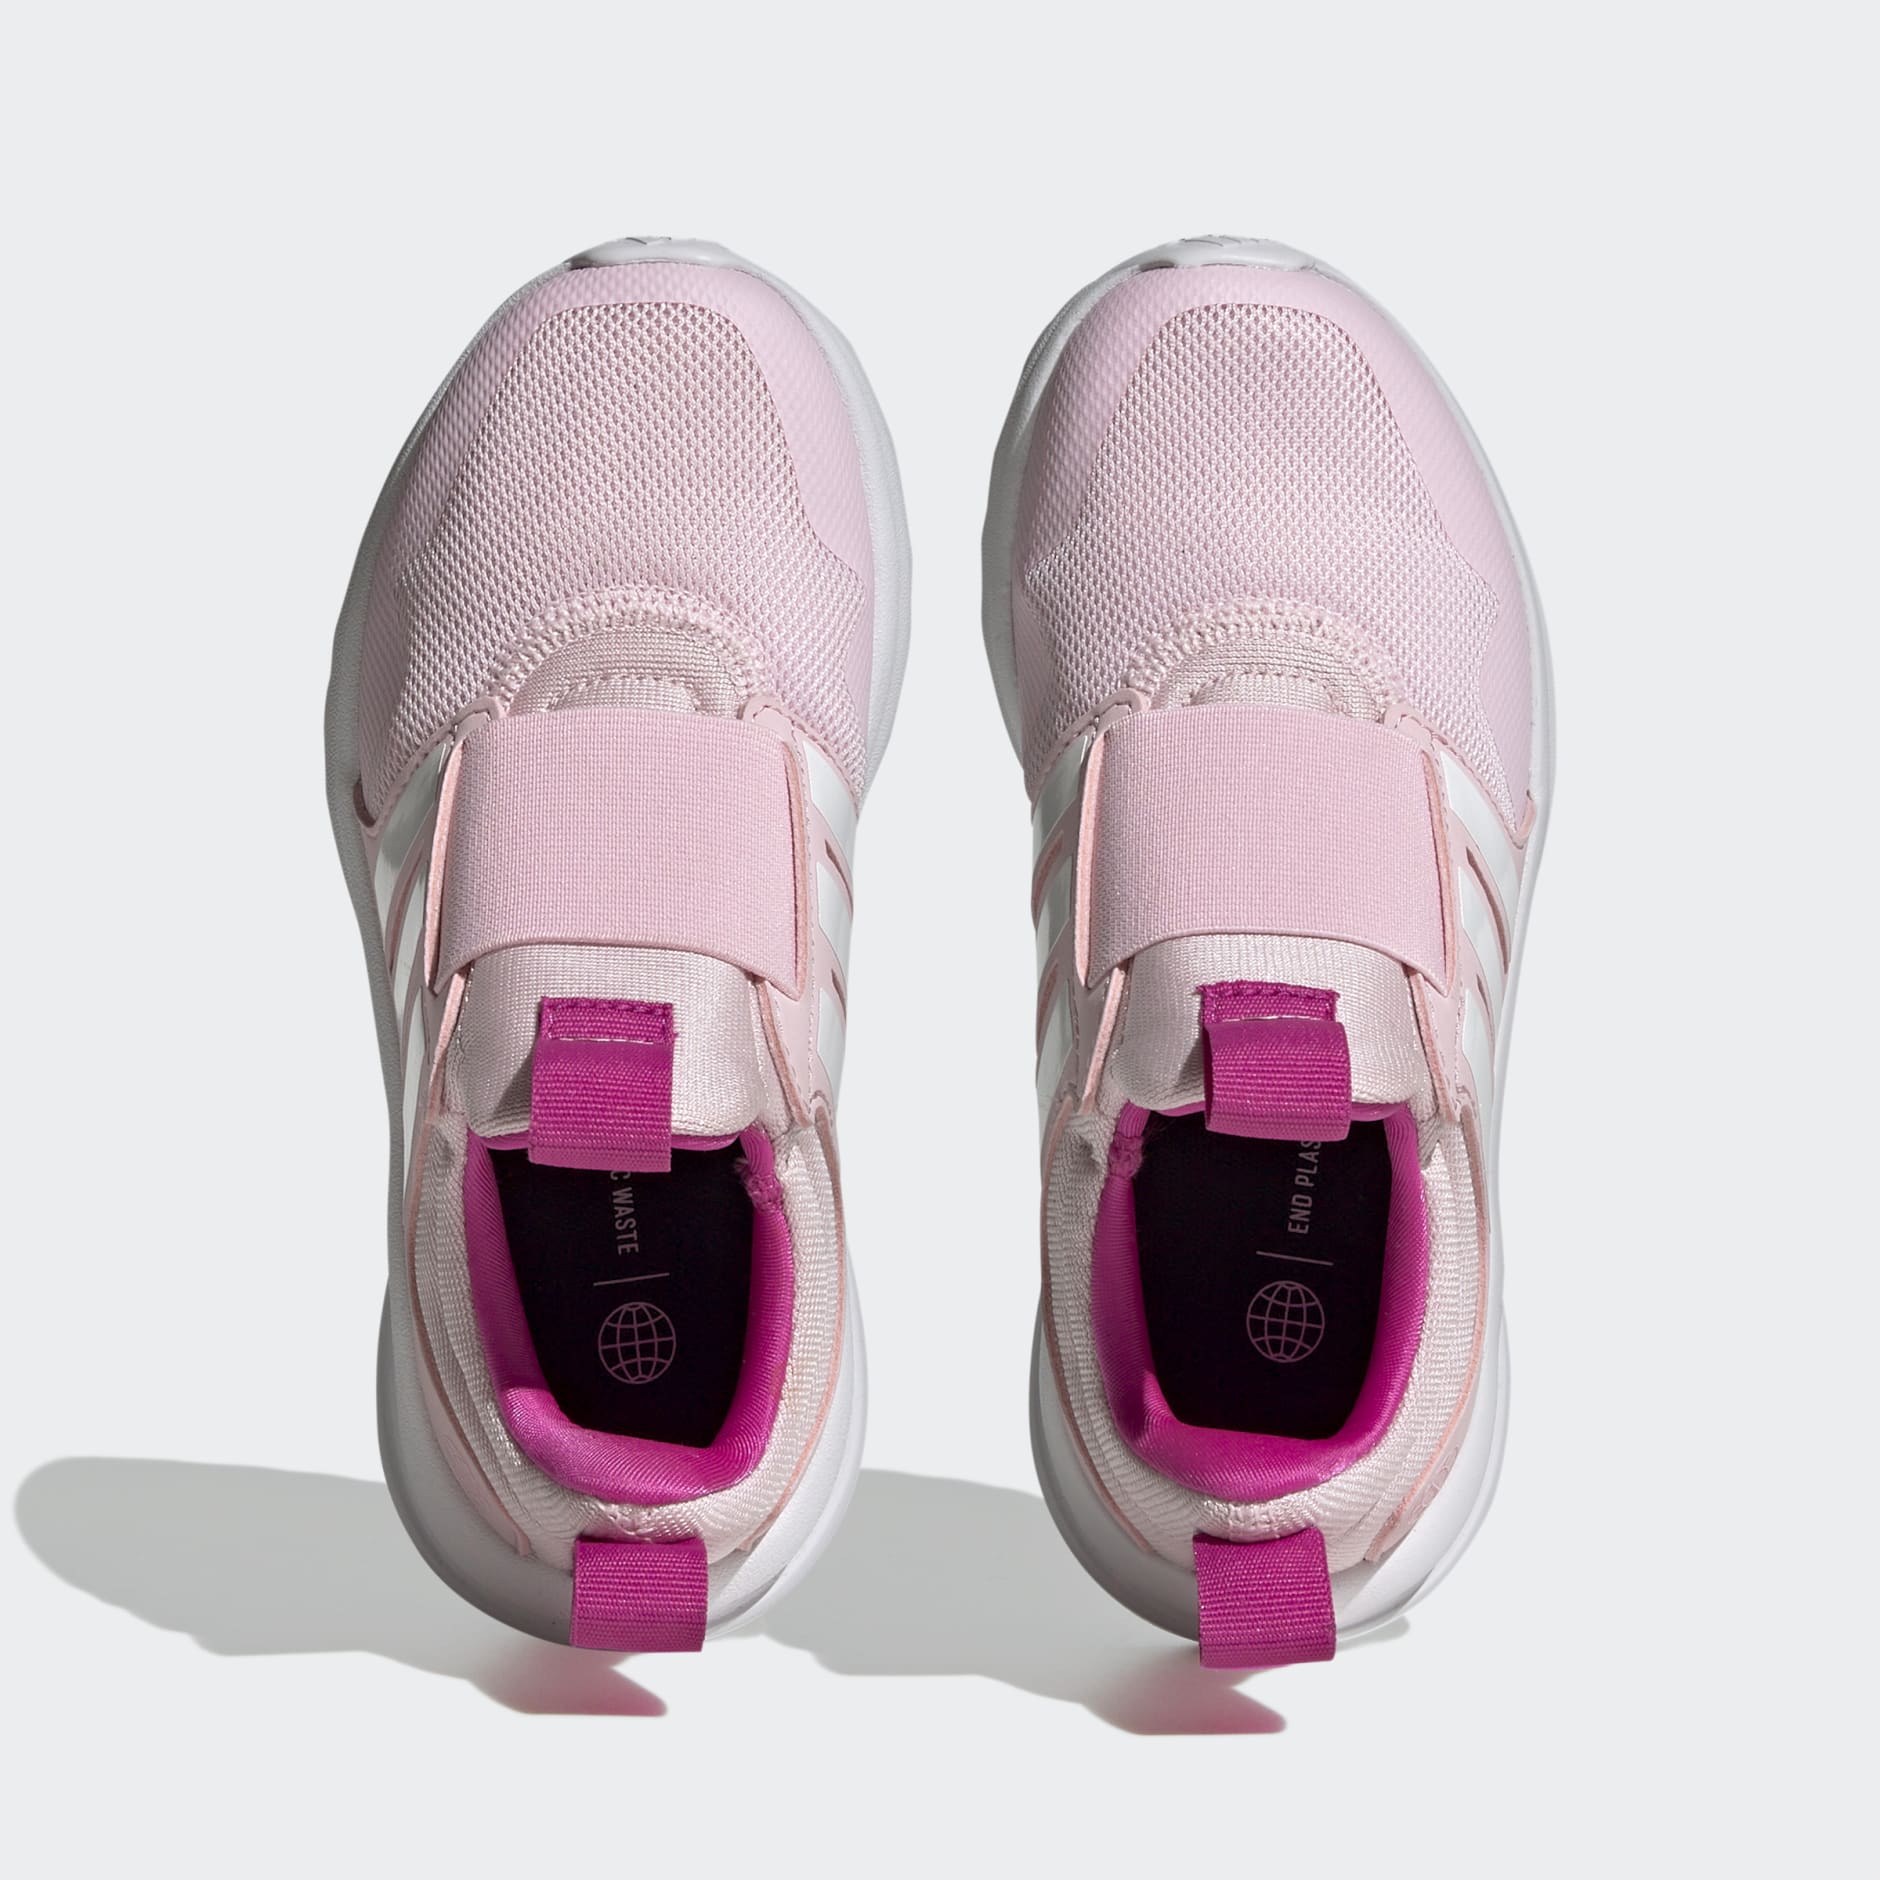 Kids Shoes - ACTIVERIDE 2.0 Sport Running Slip-On Shoes - Pink | adidas ...